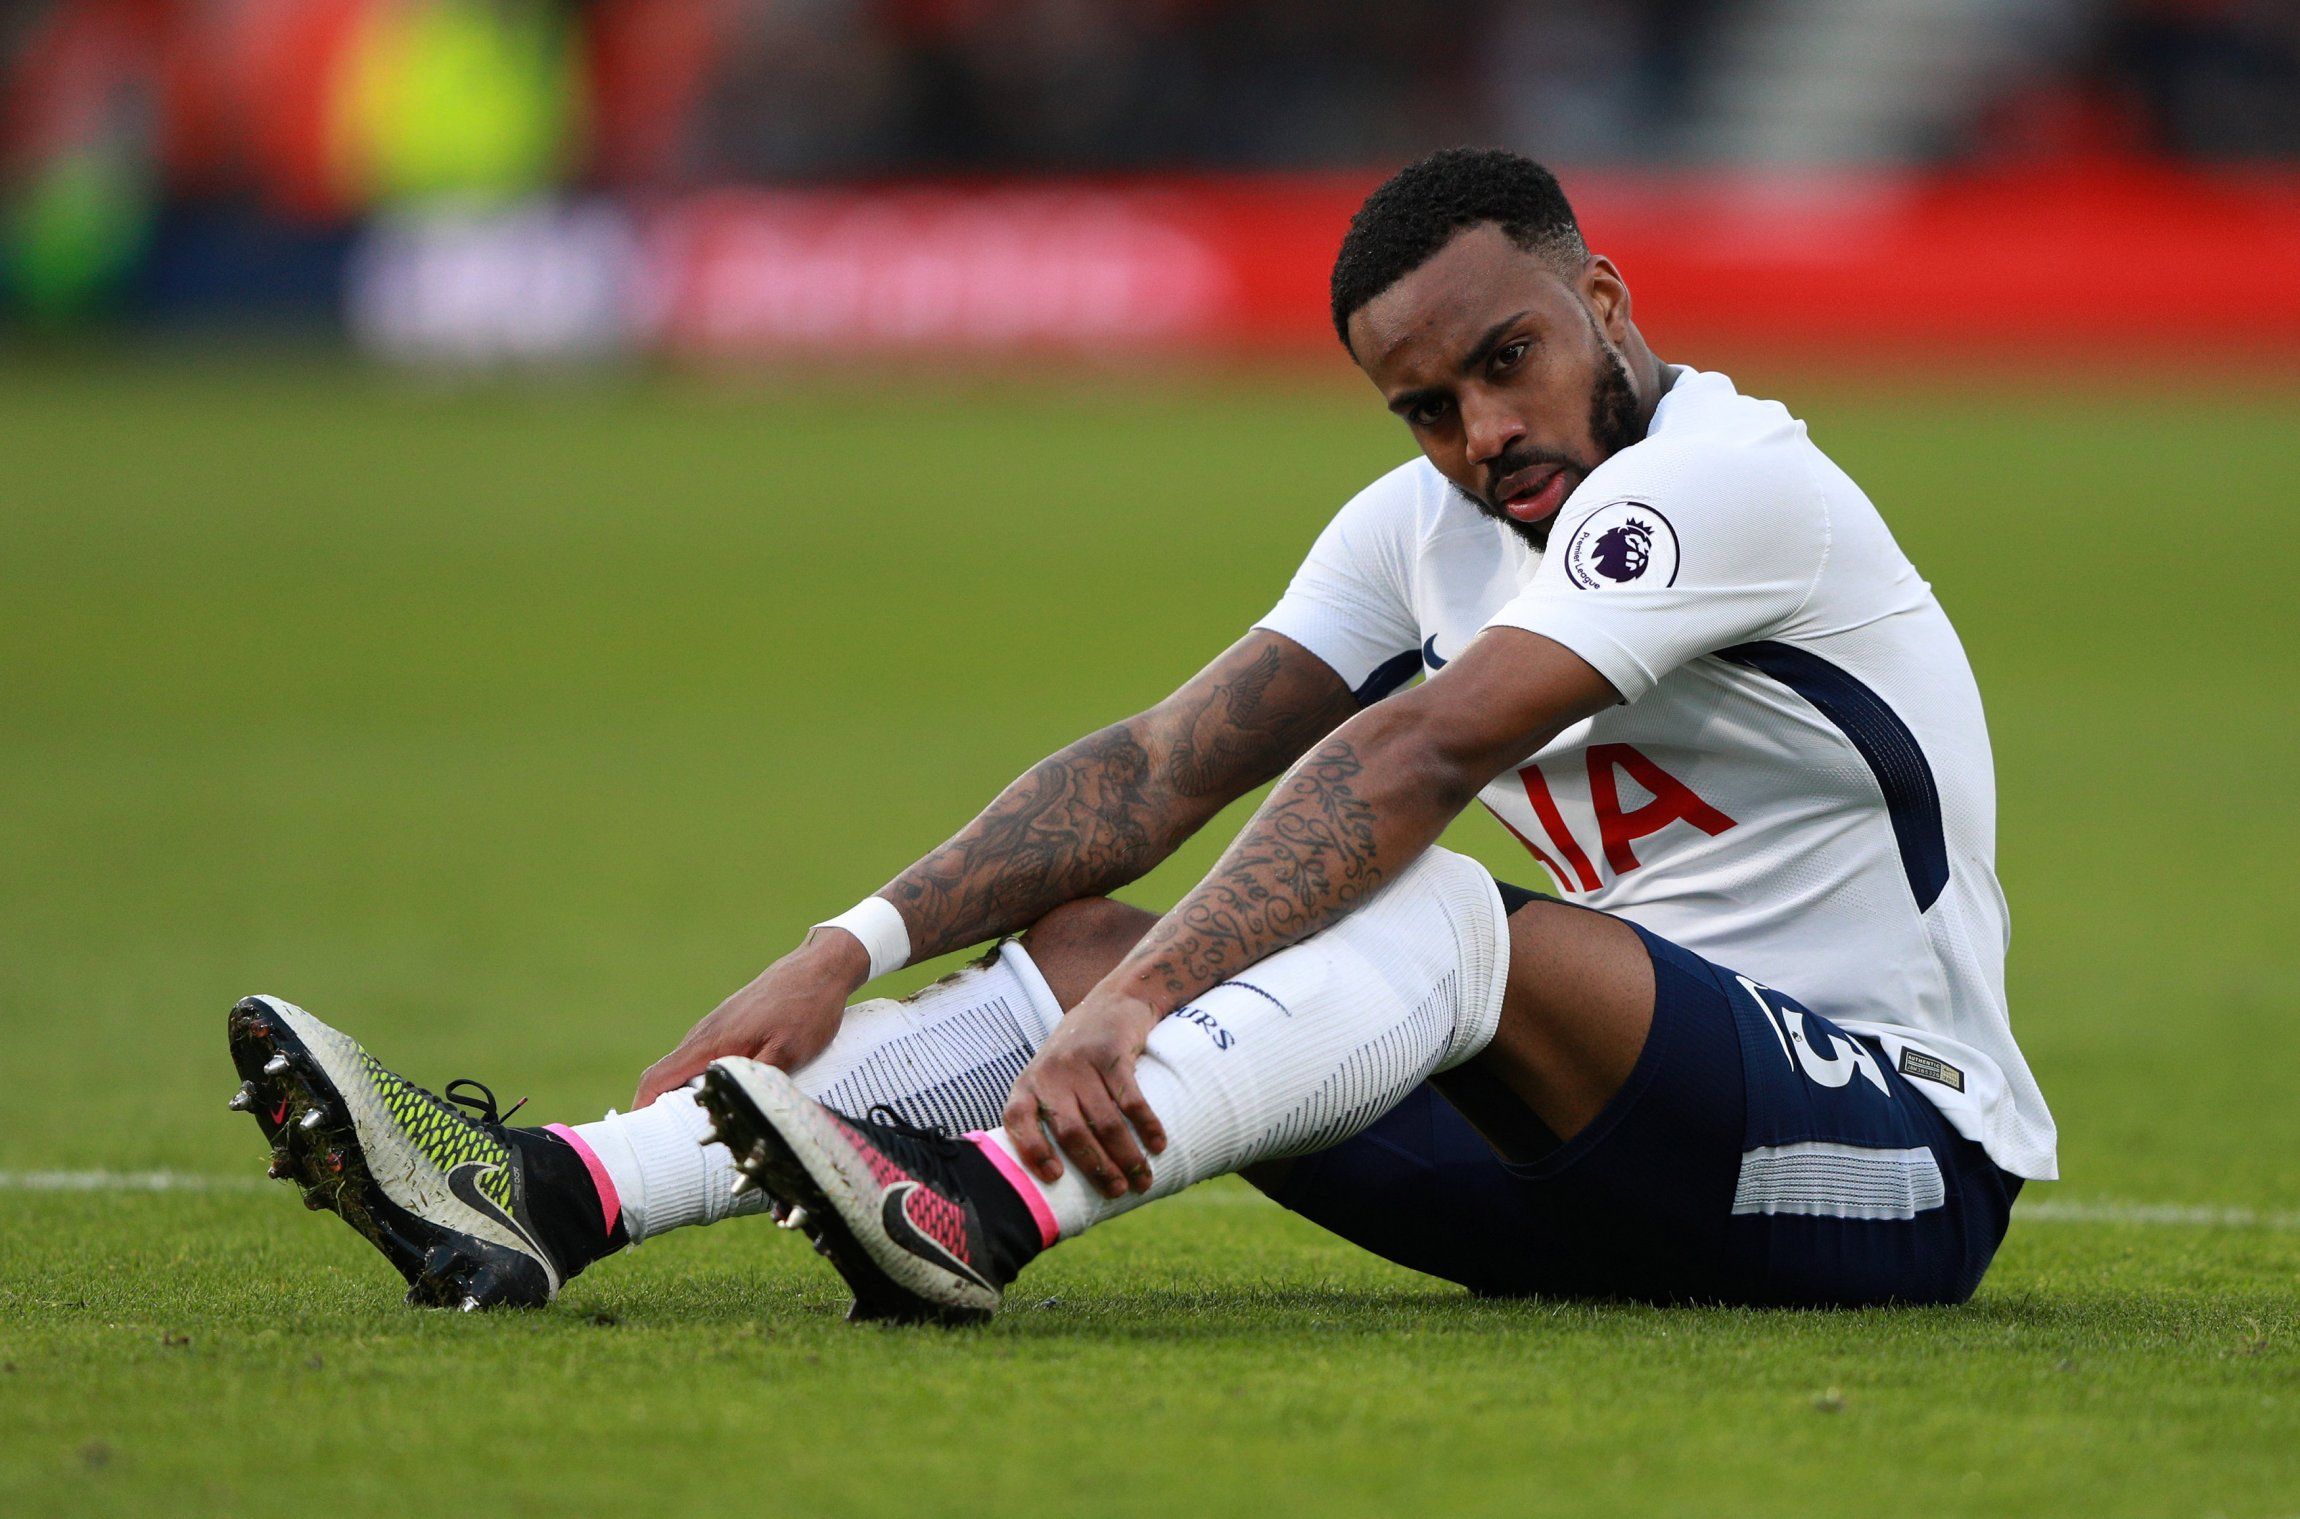 Danny Rose reacts while playing for Tottenham Hotspur